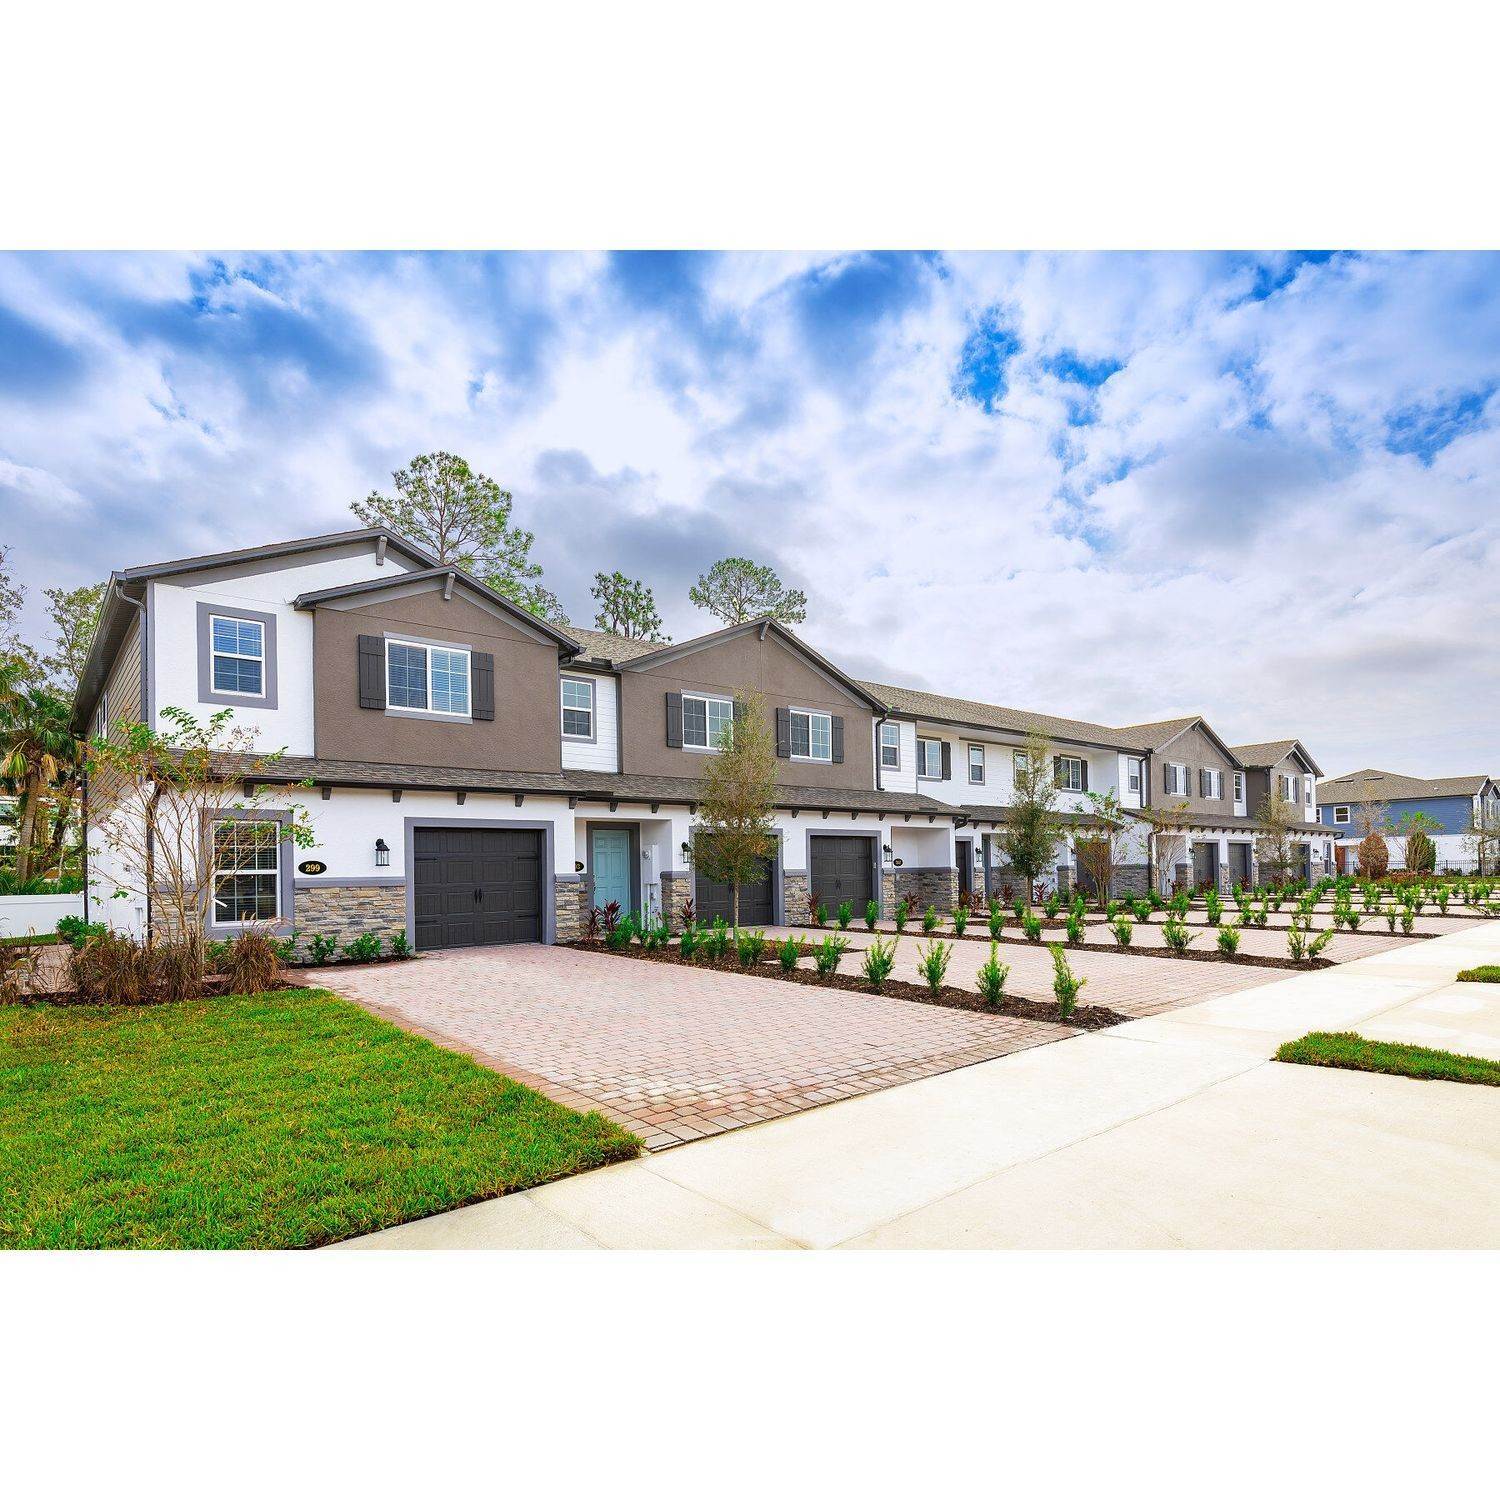 2. Towns at Narcoossee Commons bâtiment à 5601 Leon Tyson Road, St. Cloud, FL 34771